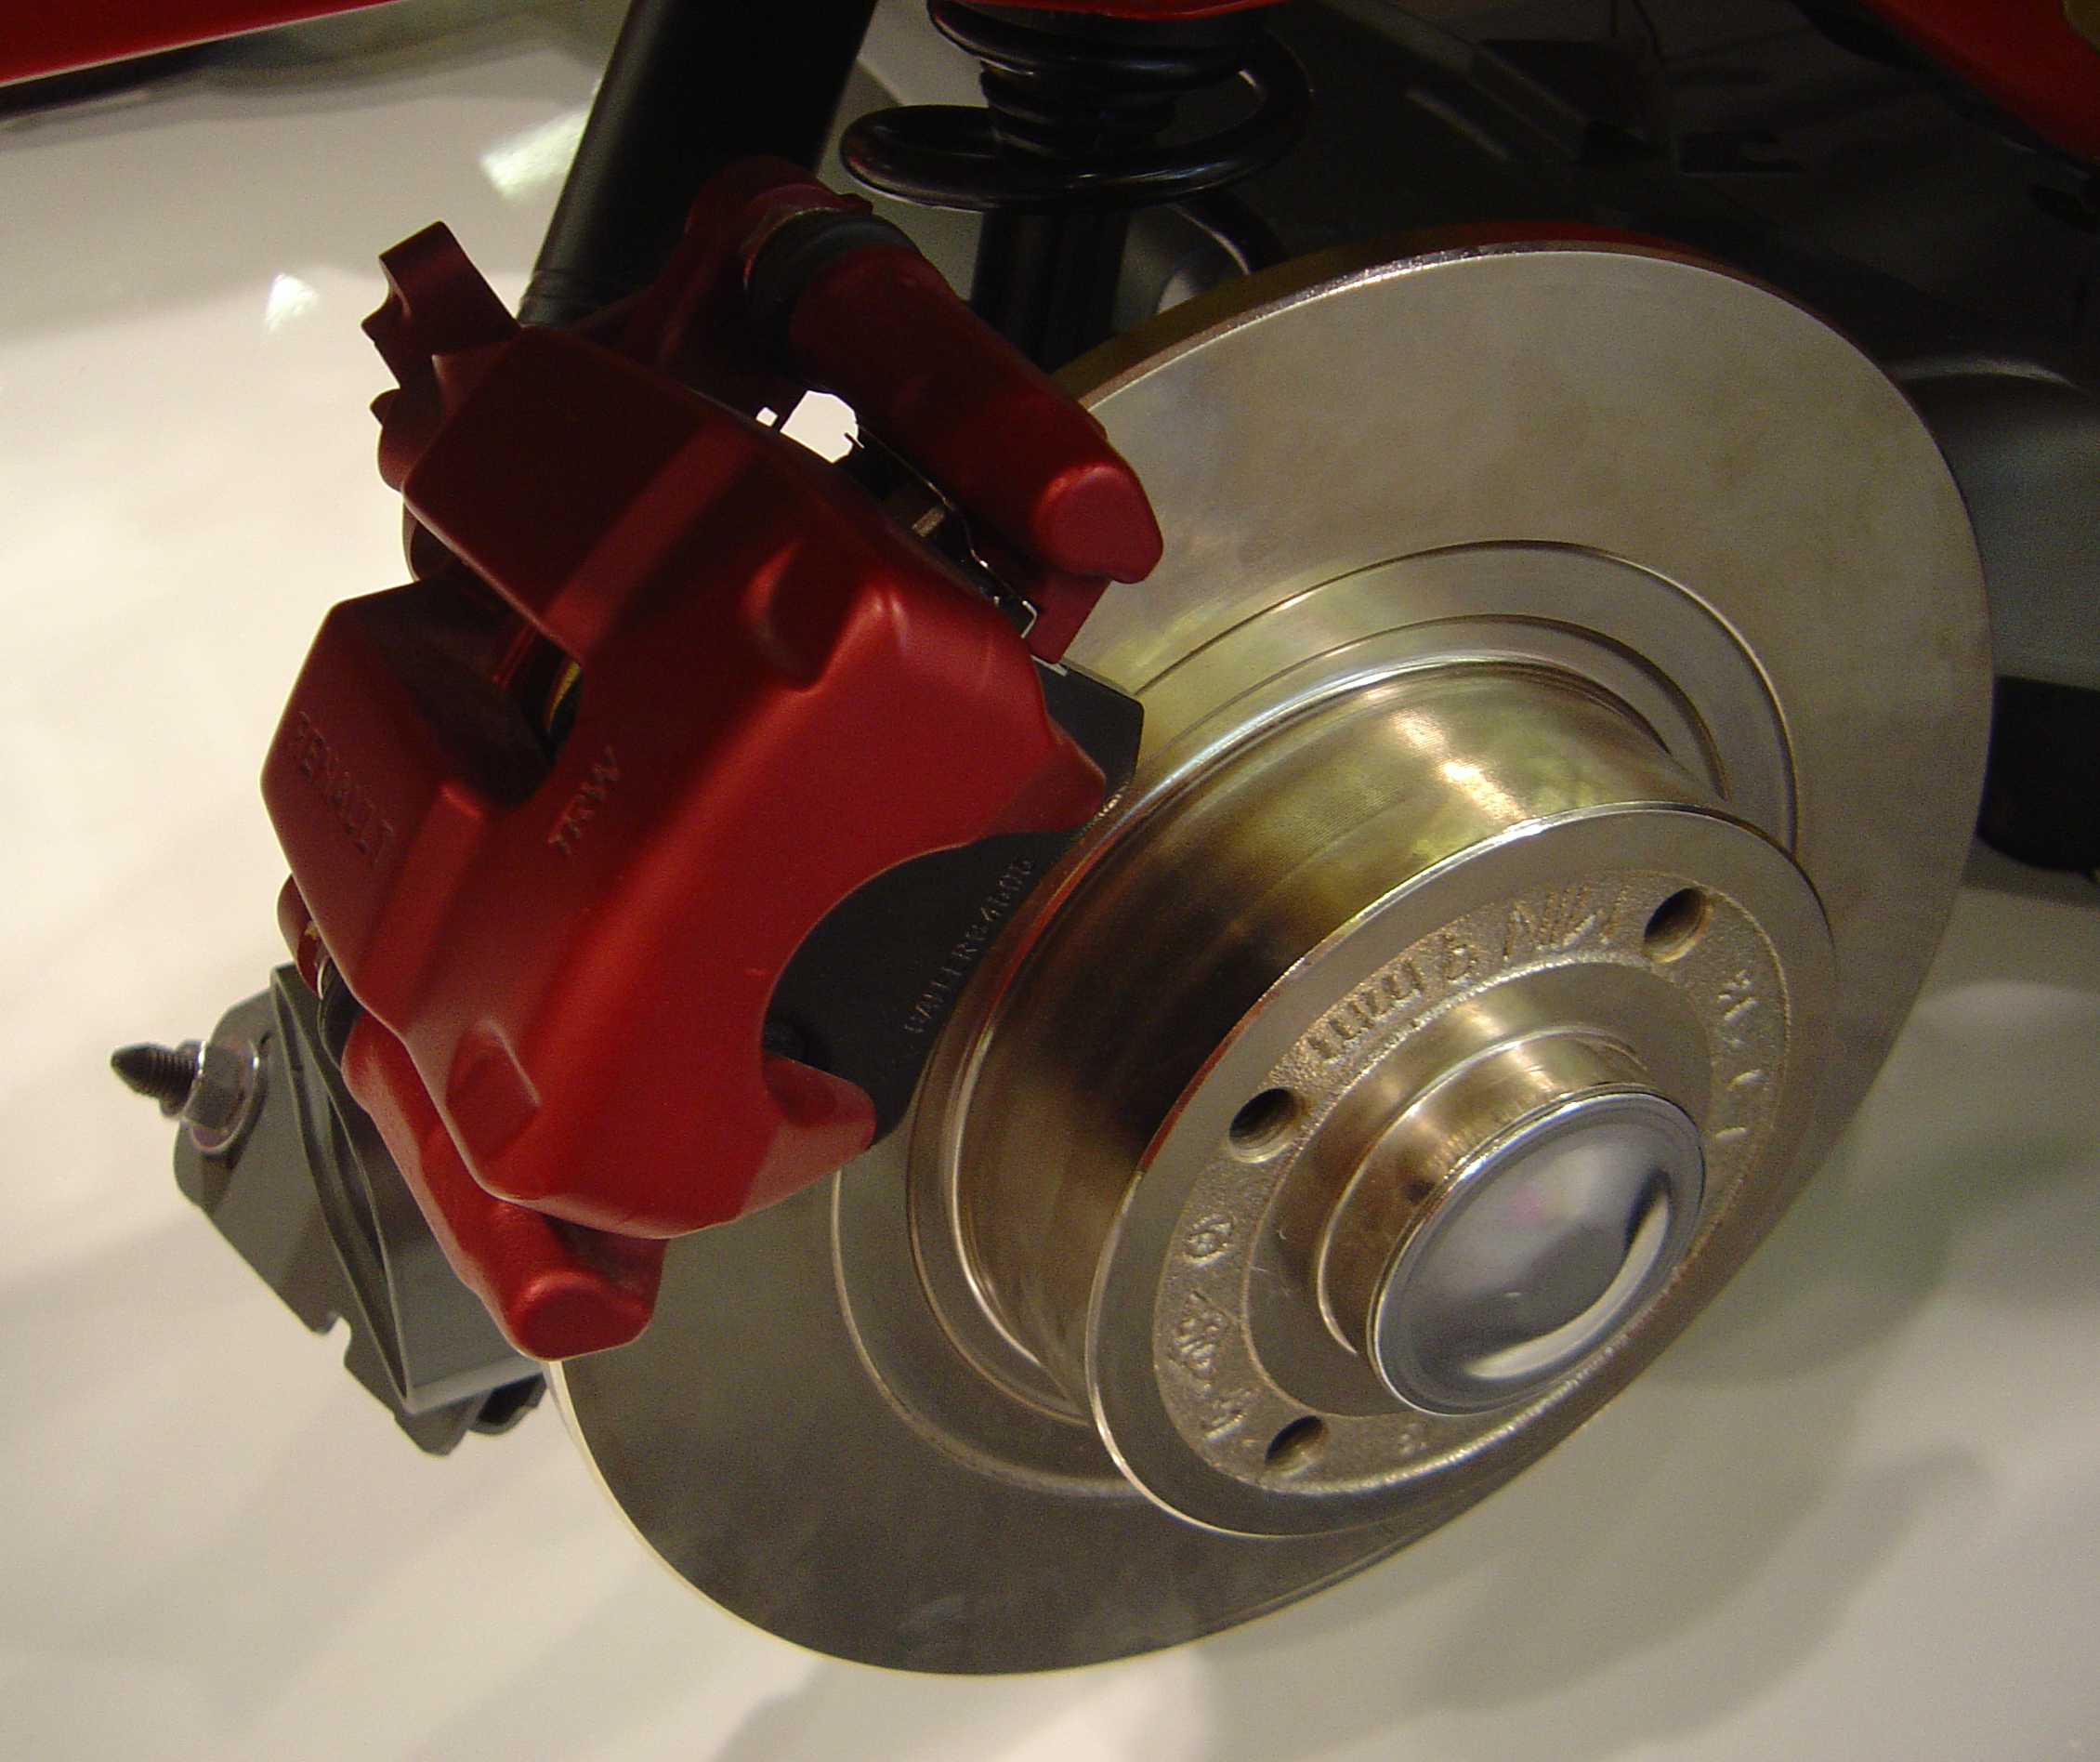 How do tractor brakes differ from automotive brakes?